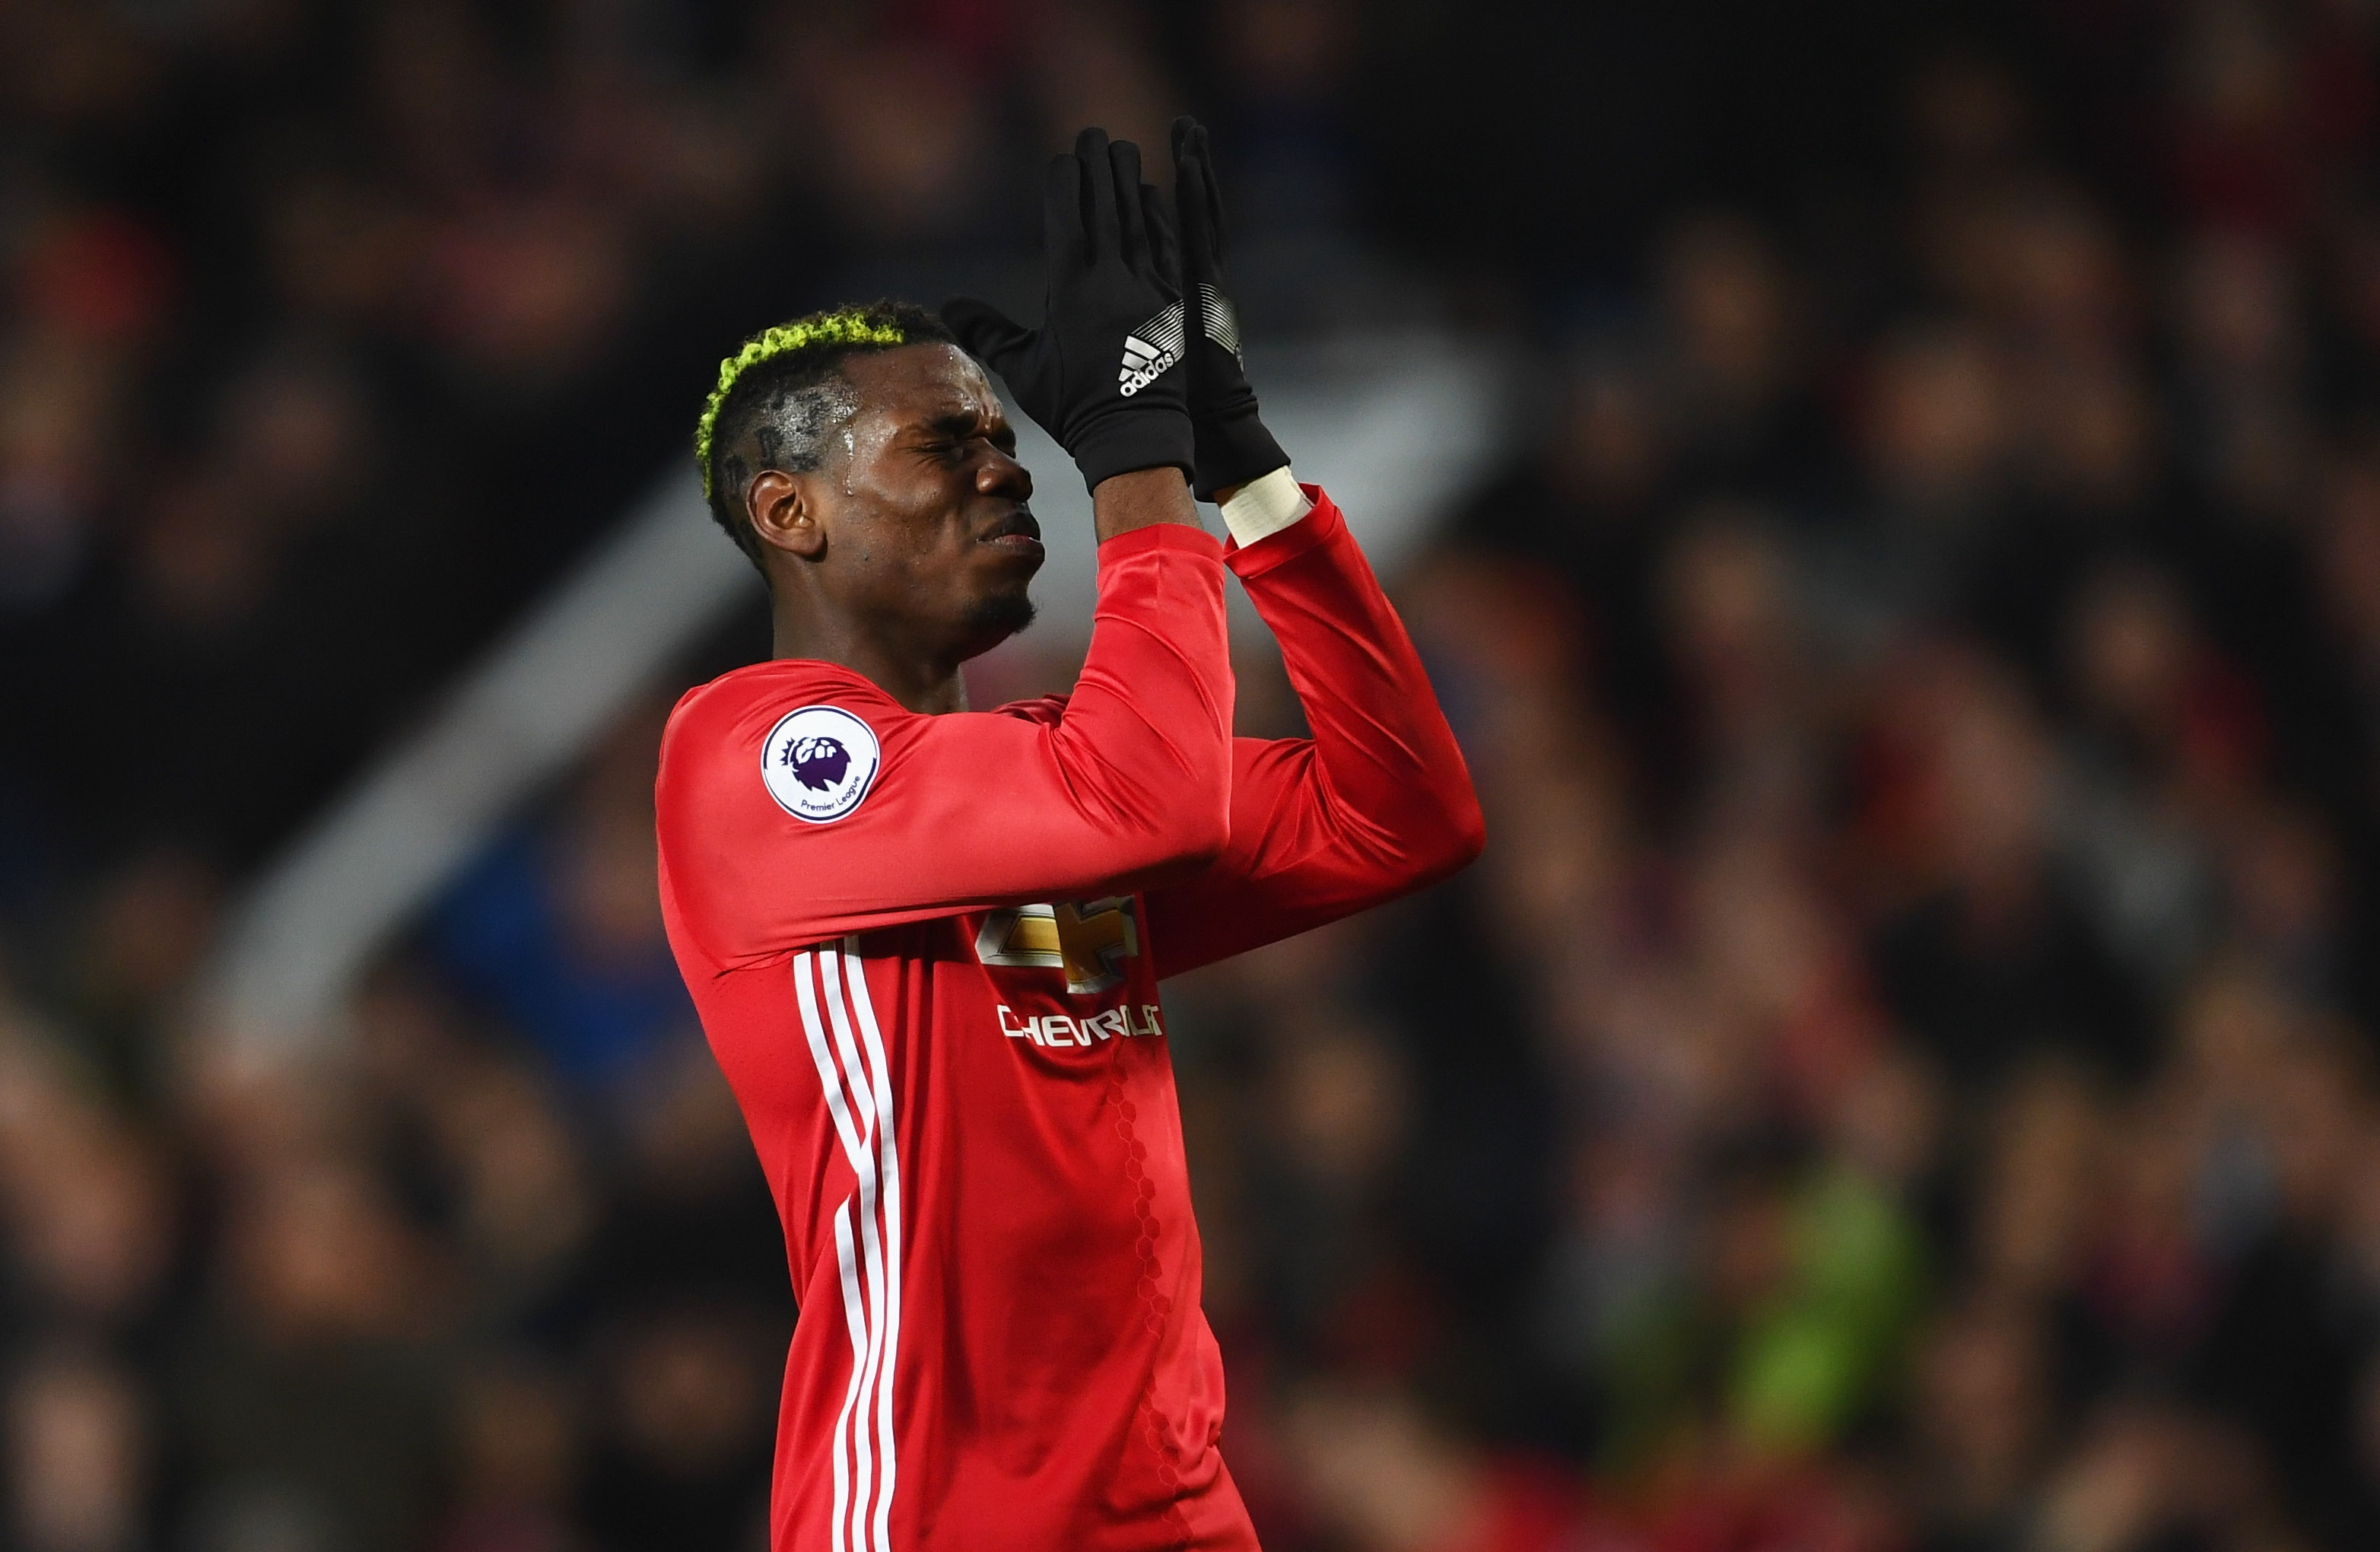 MANCHESTER, ENGLAND - JANUARY 15:  Paul Pogba of Manchester United reacts after a missed chance during the Premier League match between Manchester United and Liverpool at Old Trafford on January 15, 2017 in Manchester, England.  (Photo by Laurence Griffiths/Getty Images)